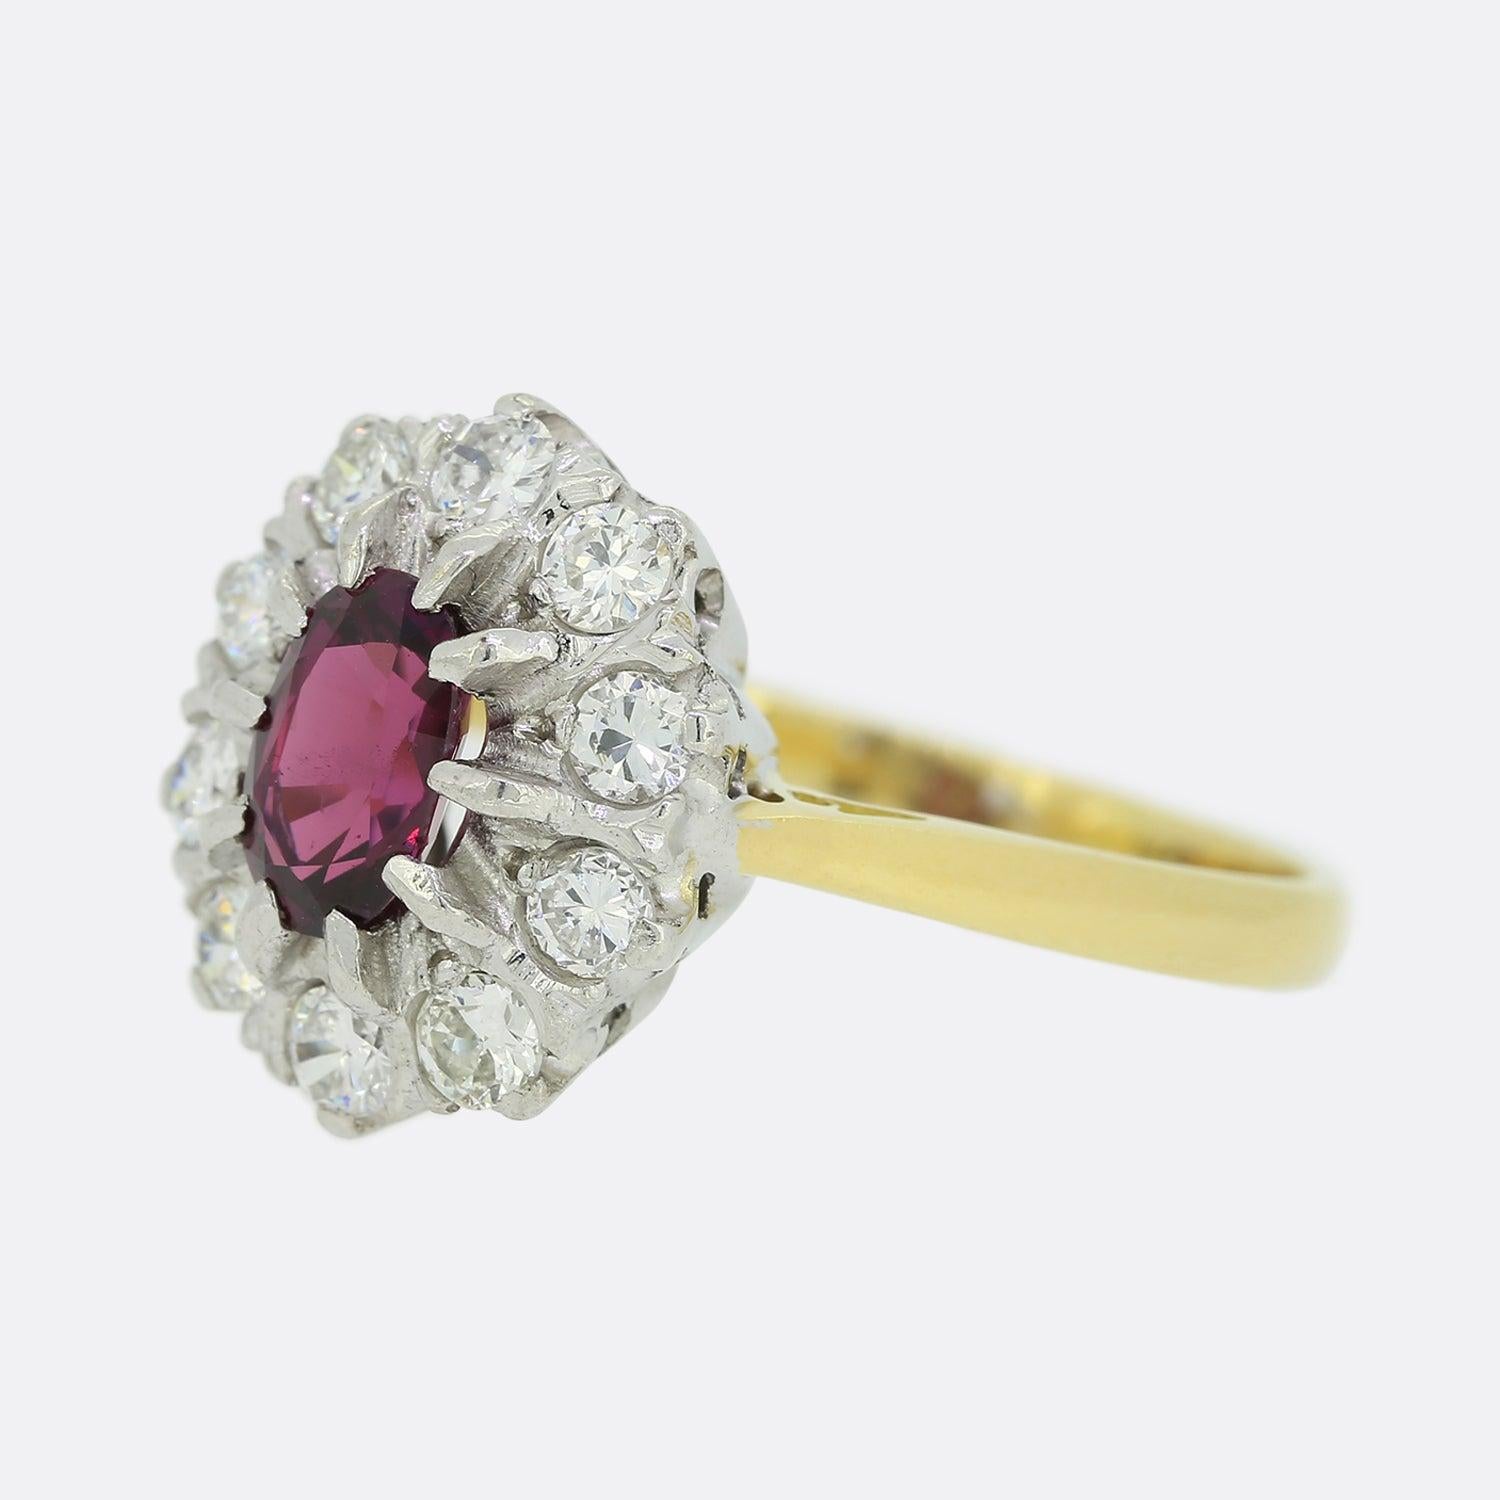 Here we have a vintage 18ct yellow gold ruby and diamond cluster ring. This piece presents a deep toned oval shaped ruby at the centre which is encompassed by an array of round brilliant cut diamonds that circulate the outer edge in white gold.